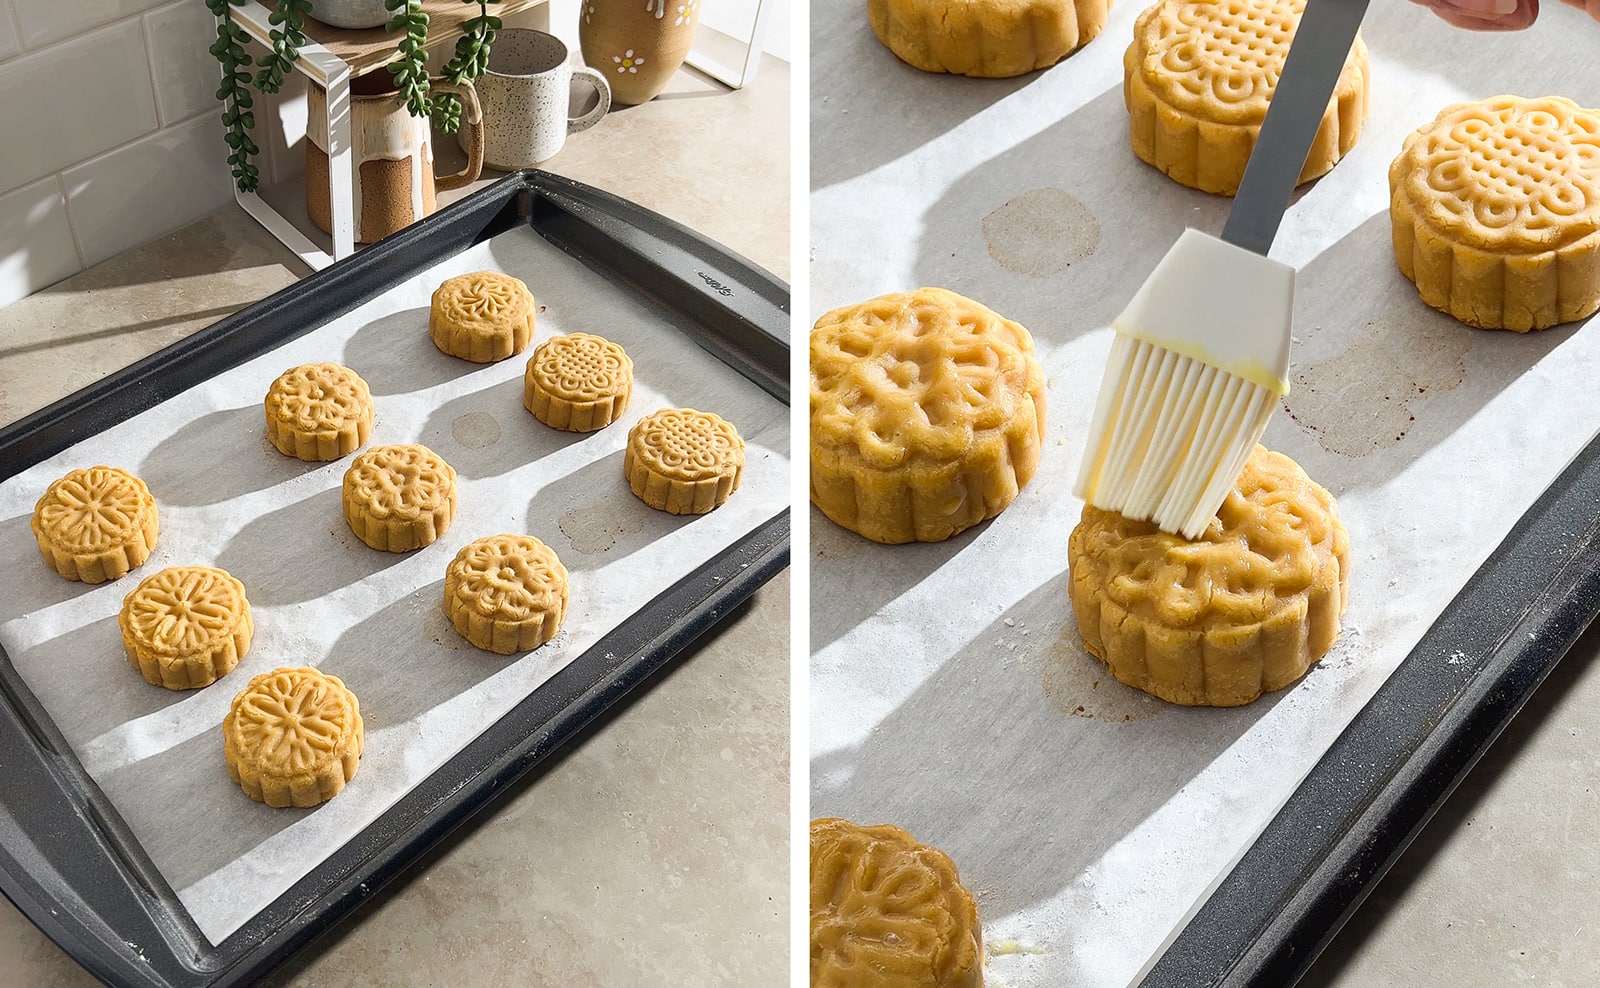 Left to right: pan of mooncakes lined up in rows, brushing egg wash on a mooncake.